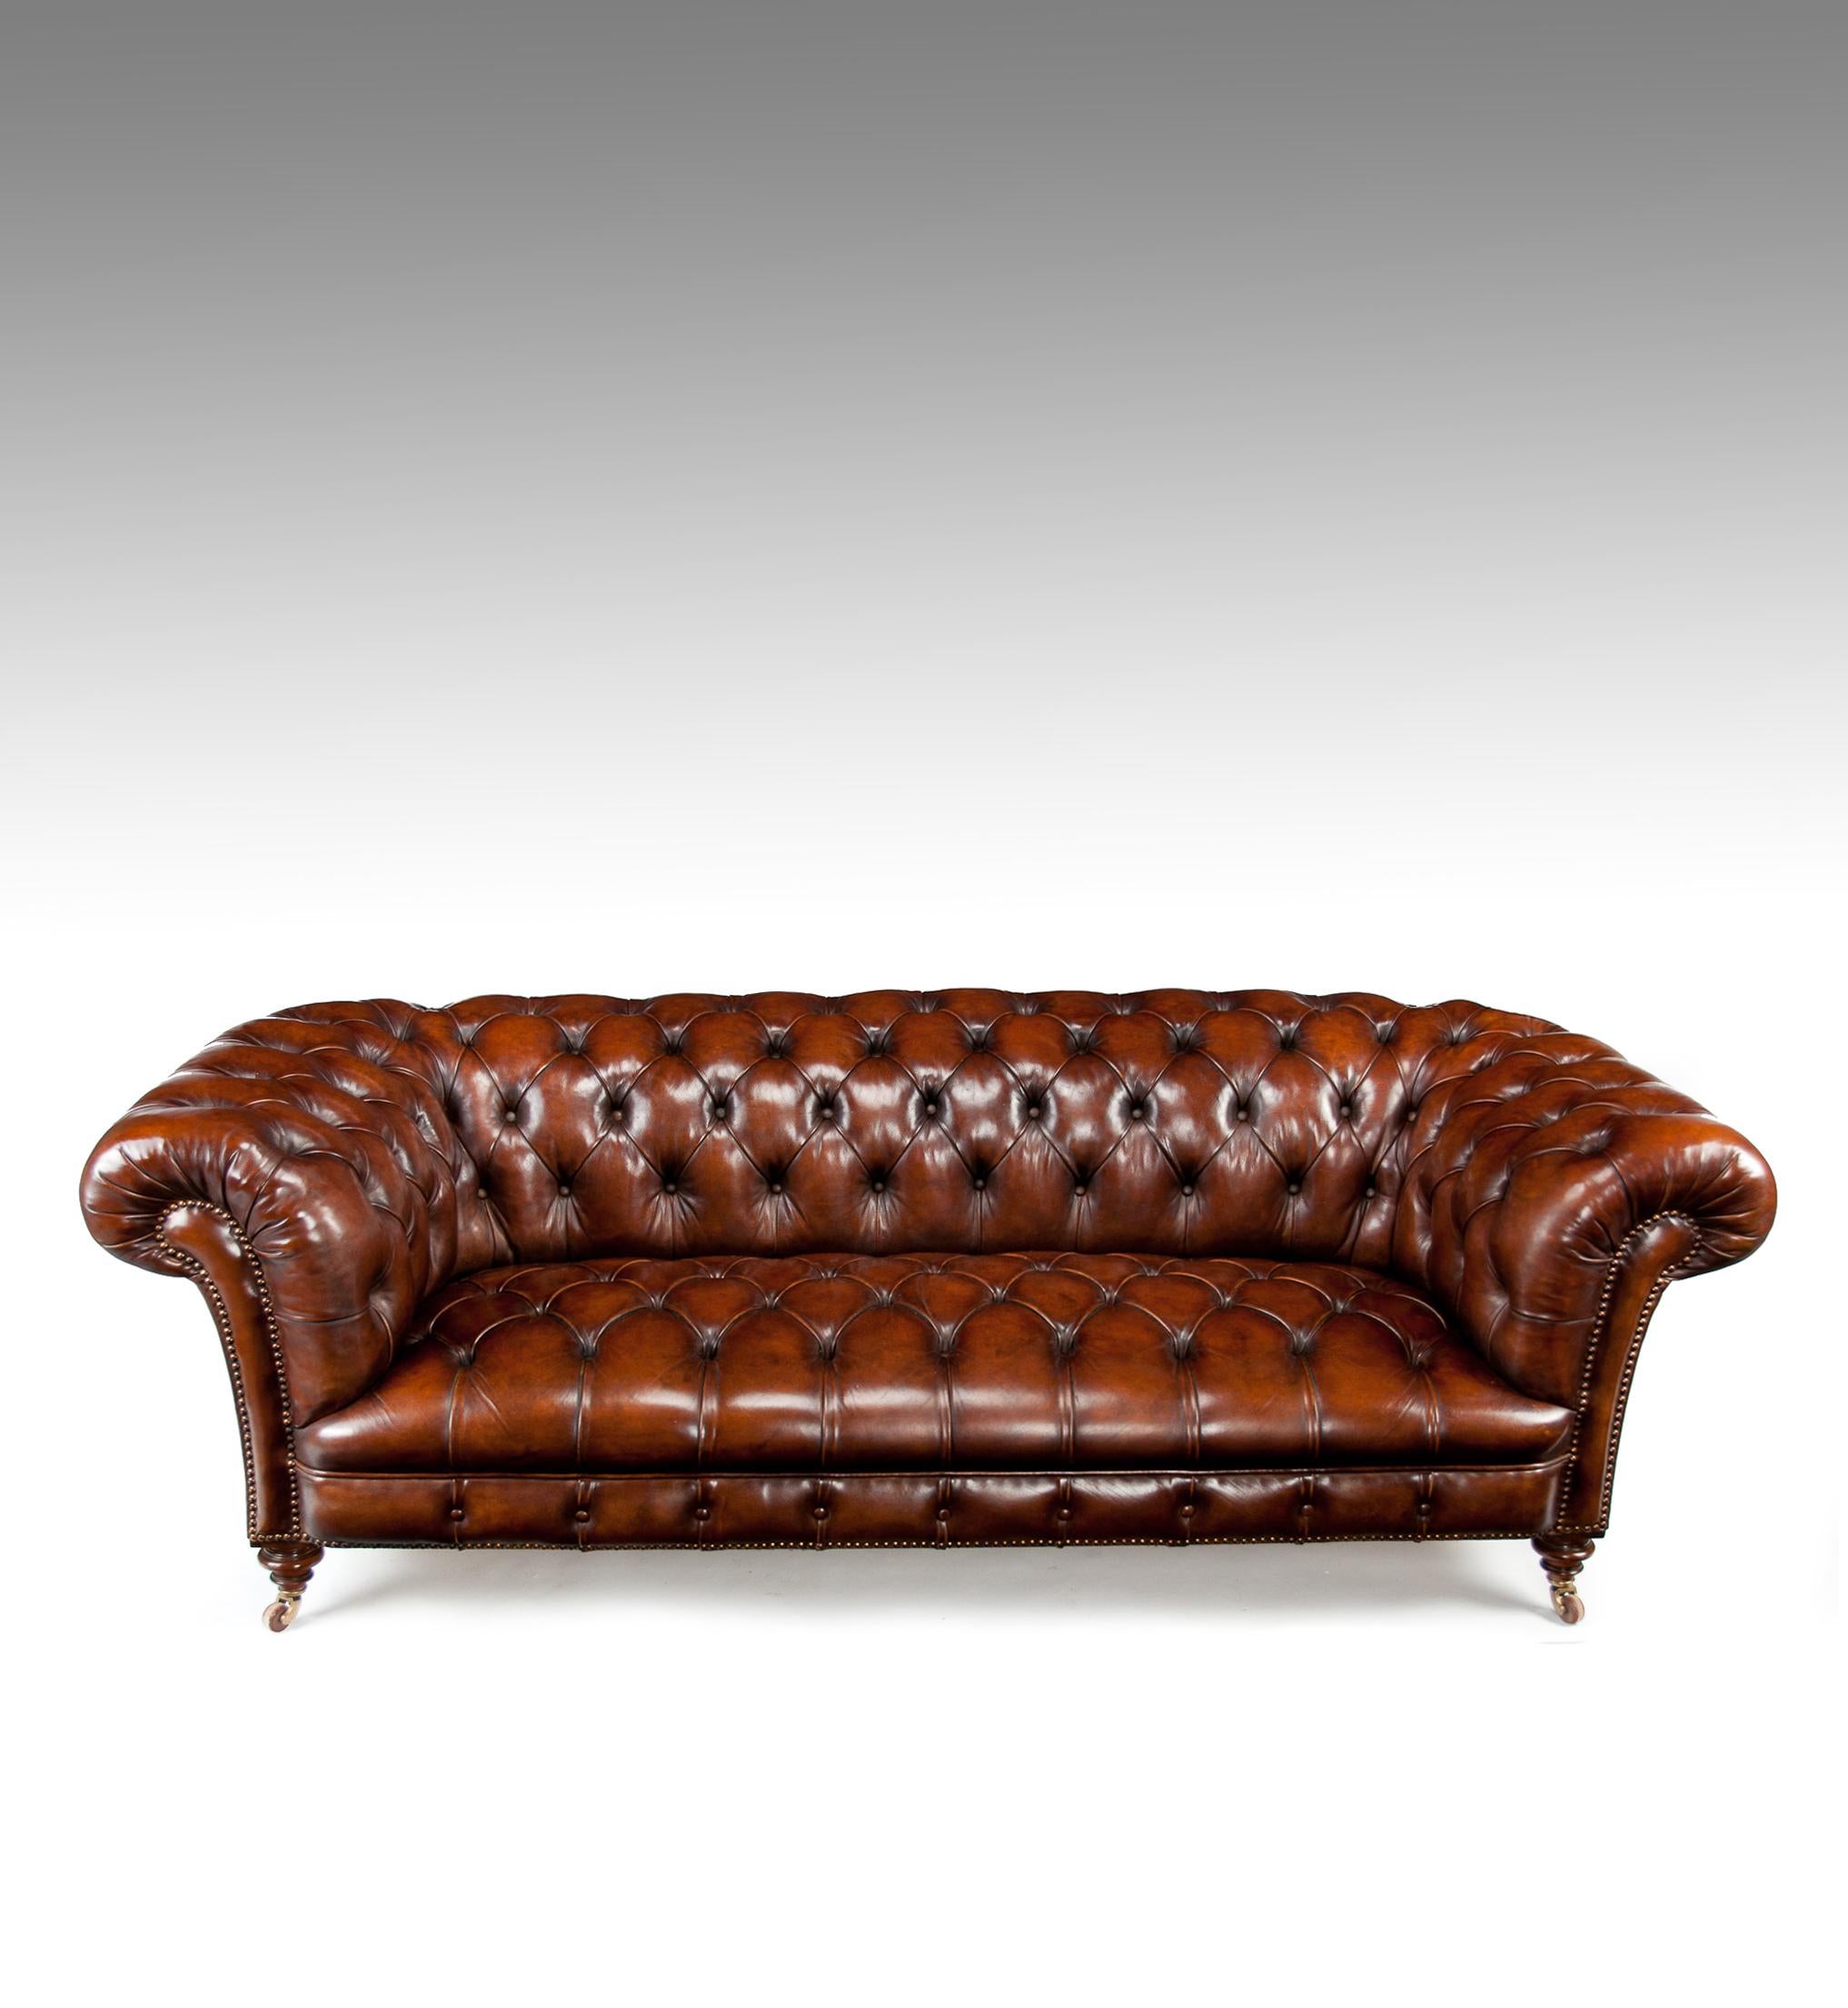 Victorian Wonderful 19th Century Deep Buttoned Leather Chesterfield by James Shoolbred